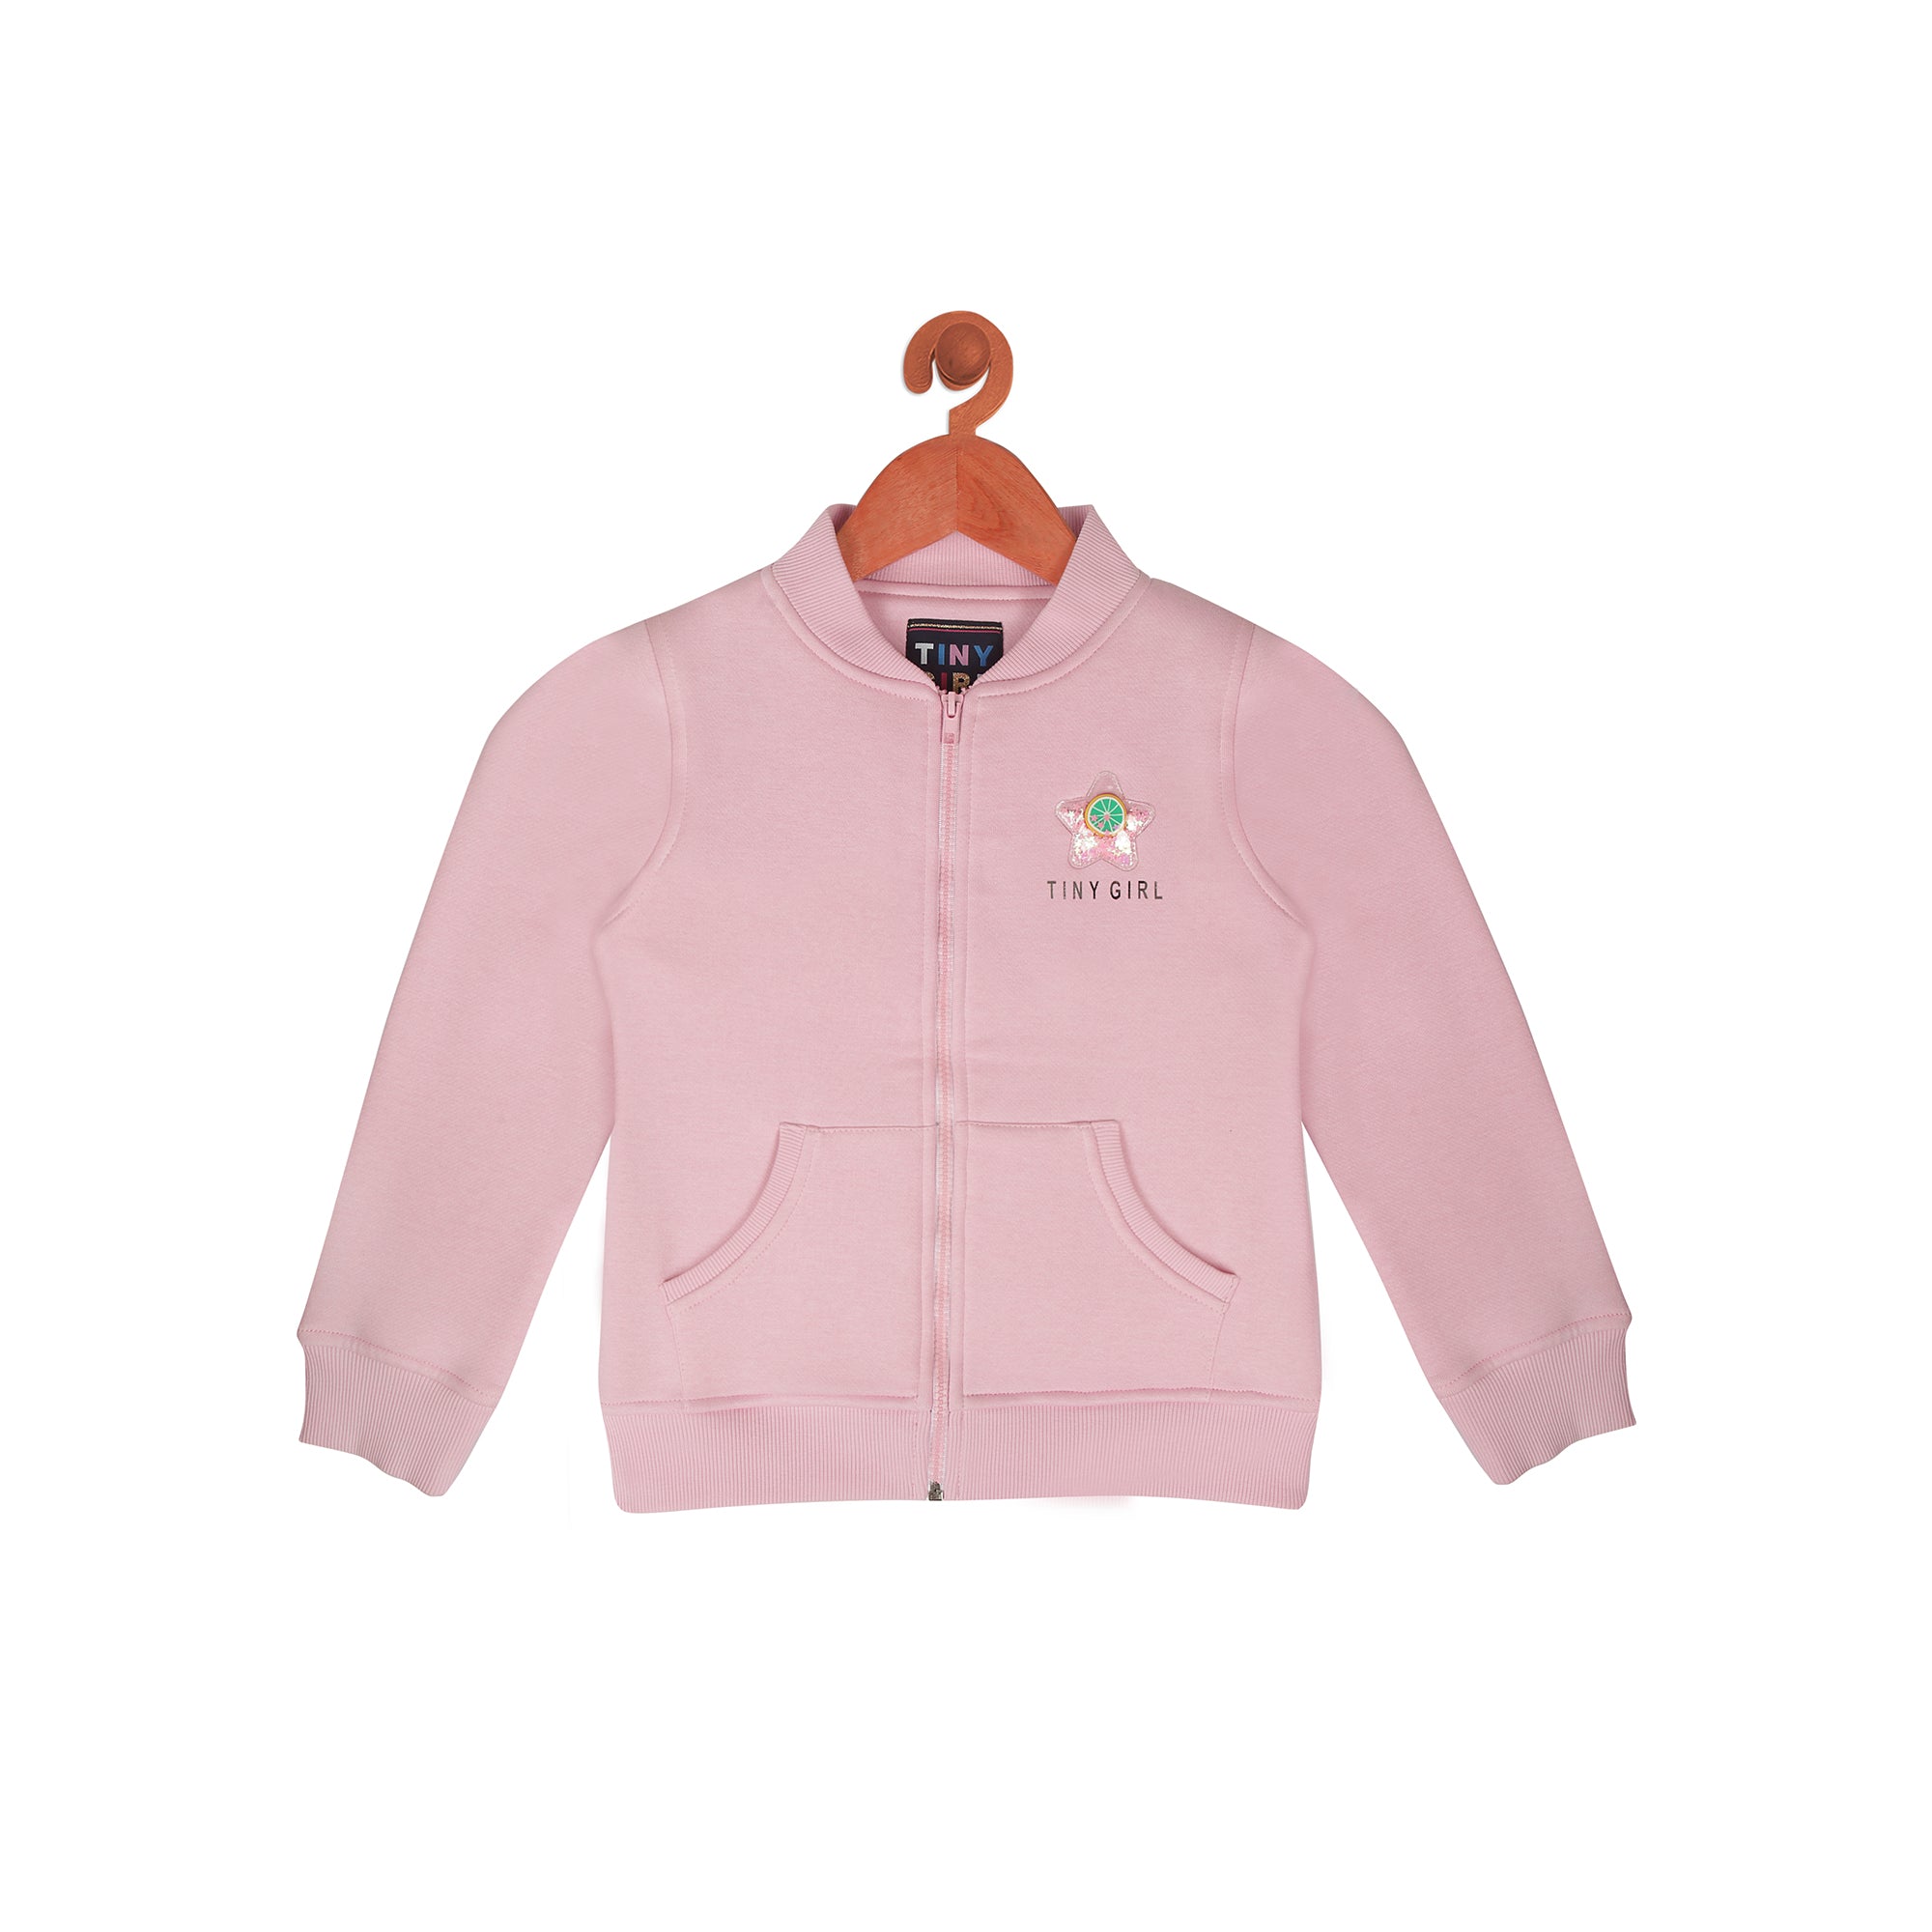 Tiny Girl Basic Zipper Sweatshirt With Front Pockets In Light Pink